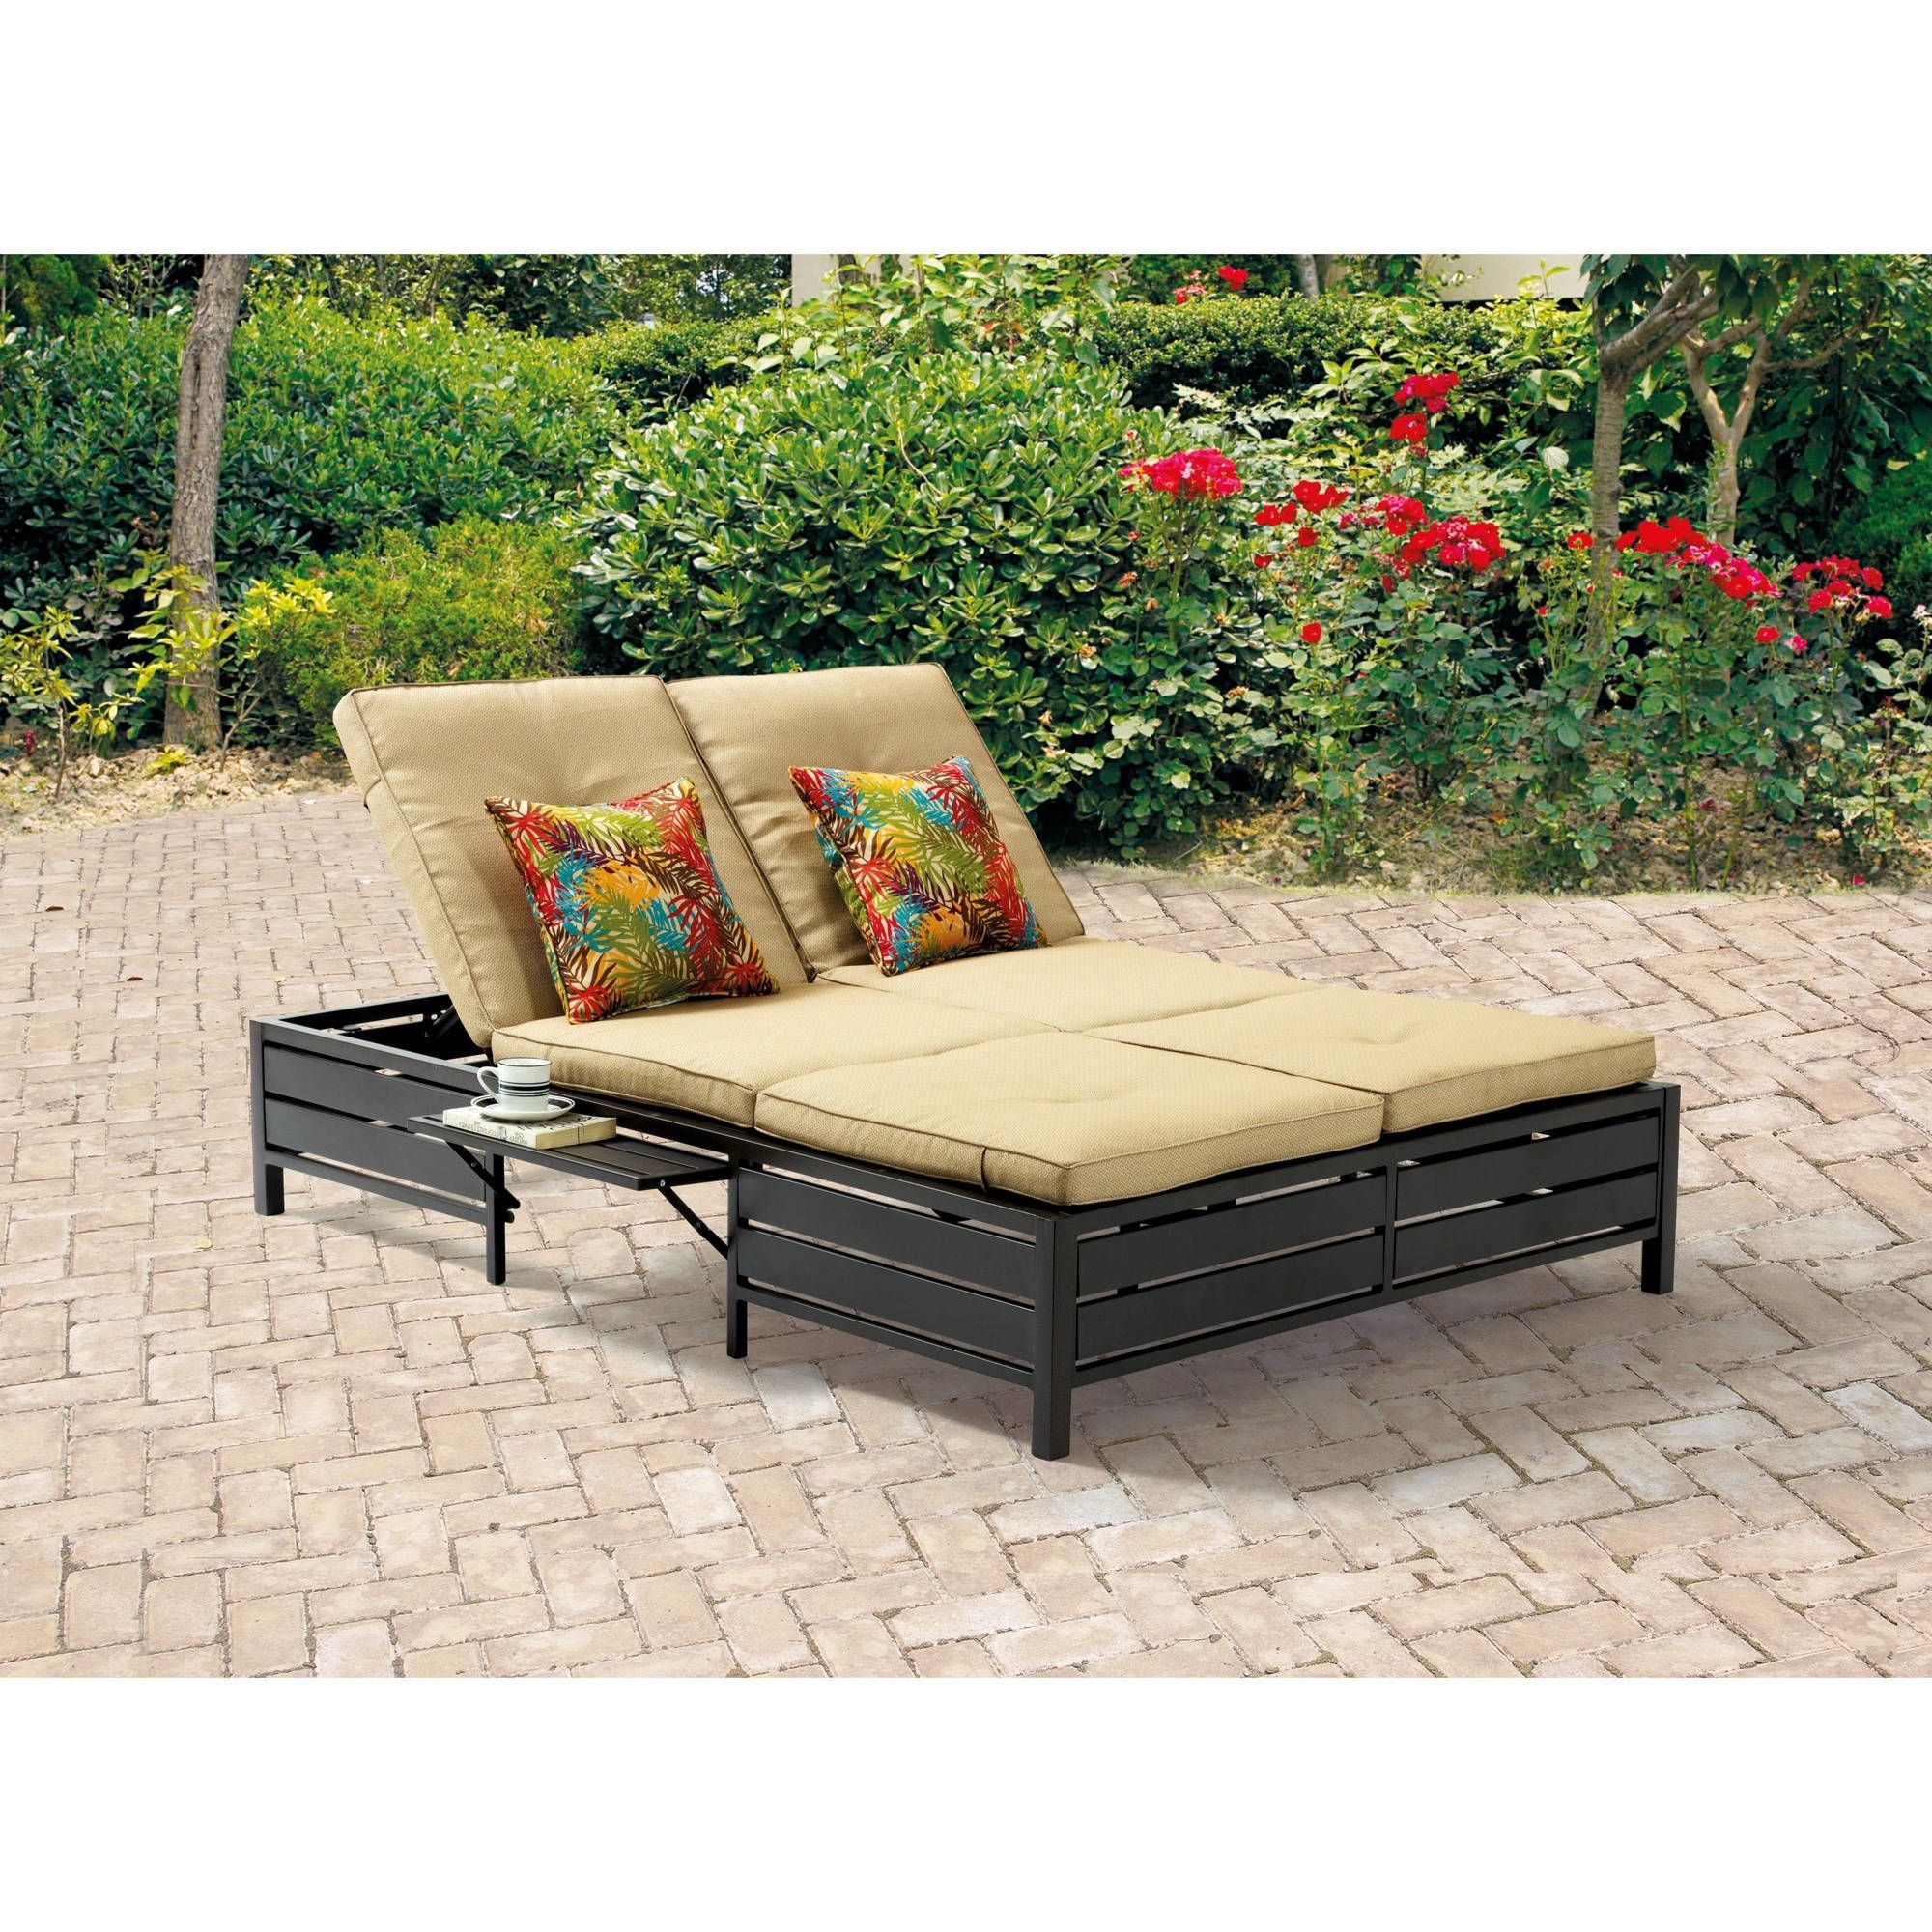 Mainstays Outdoor Double Chaise Lounger, Tan, Seats 2 – Walmart Regarding Most Current Double Chaise Lounges For Outdoor (View 14 of 15)